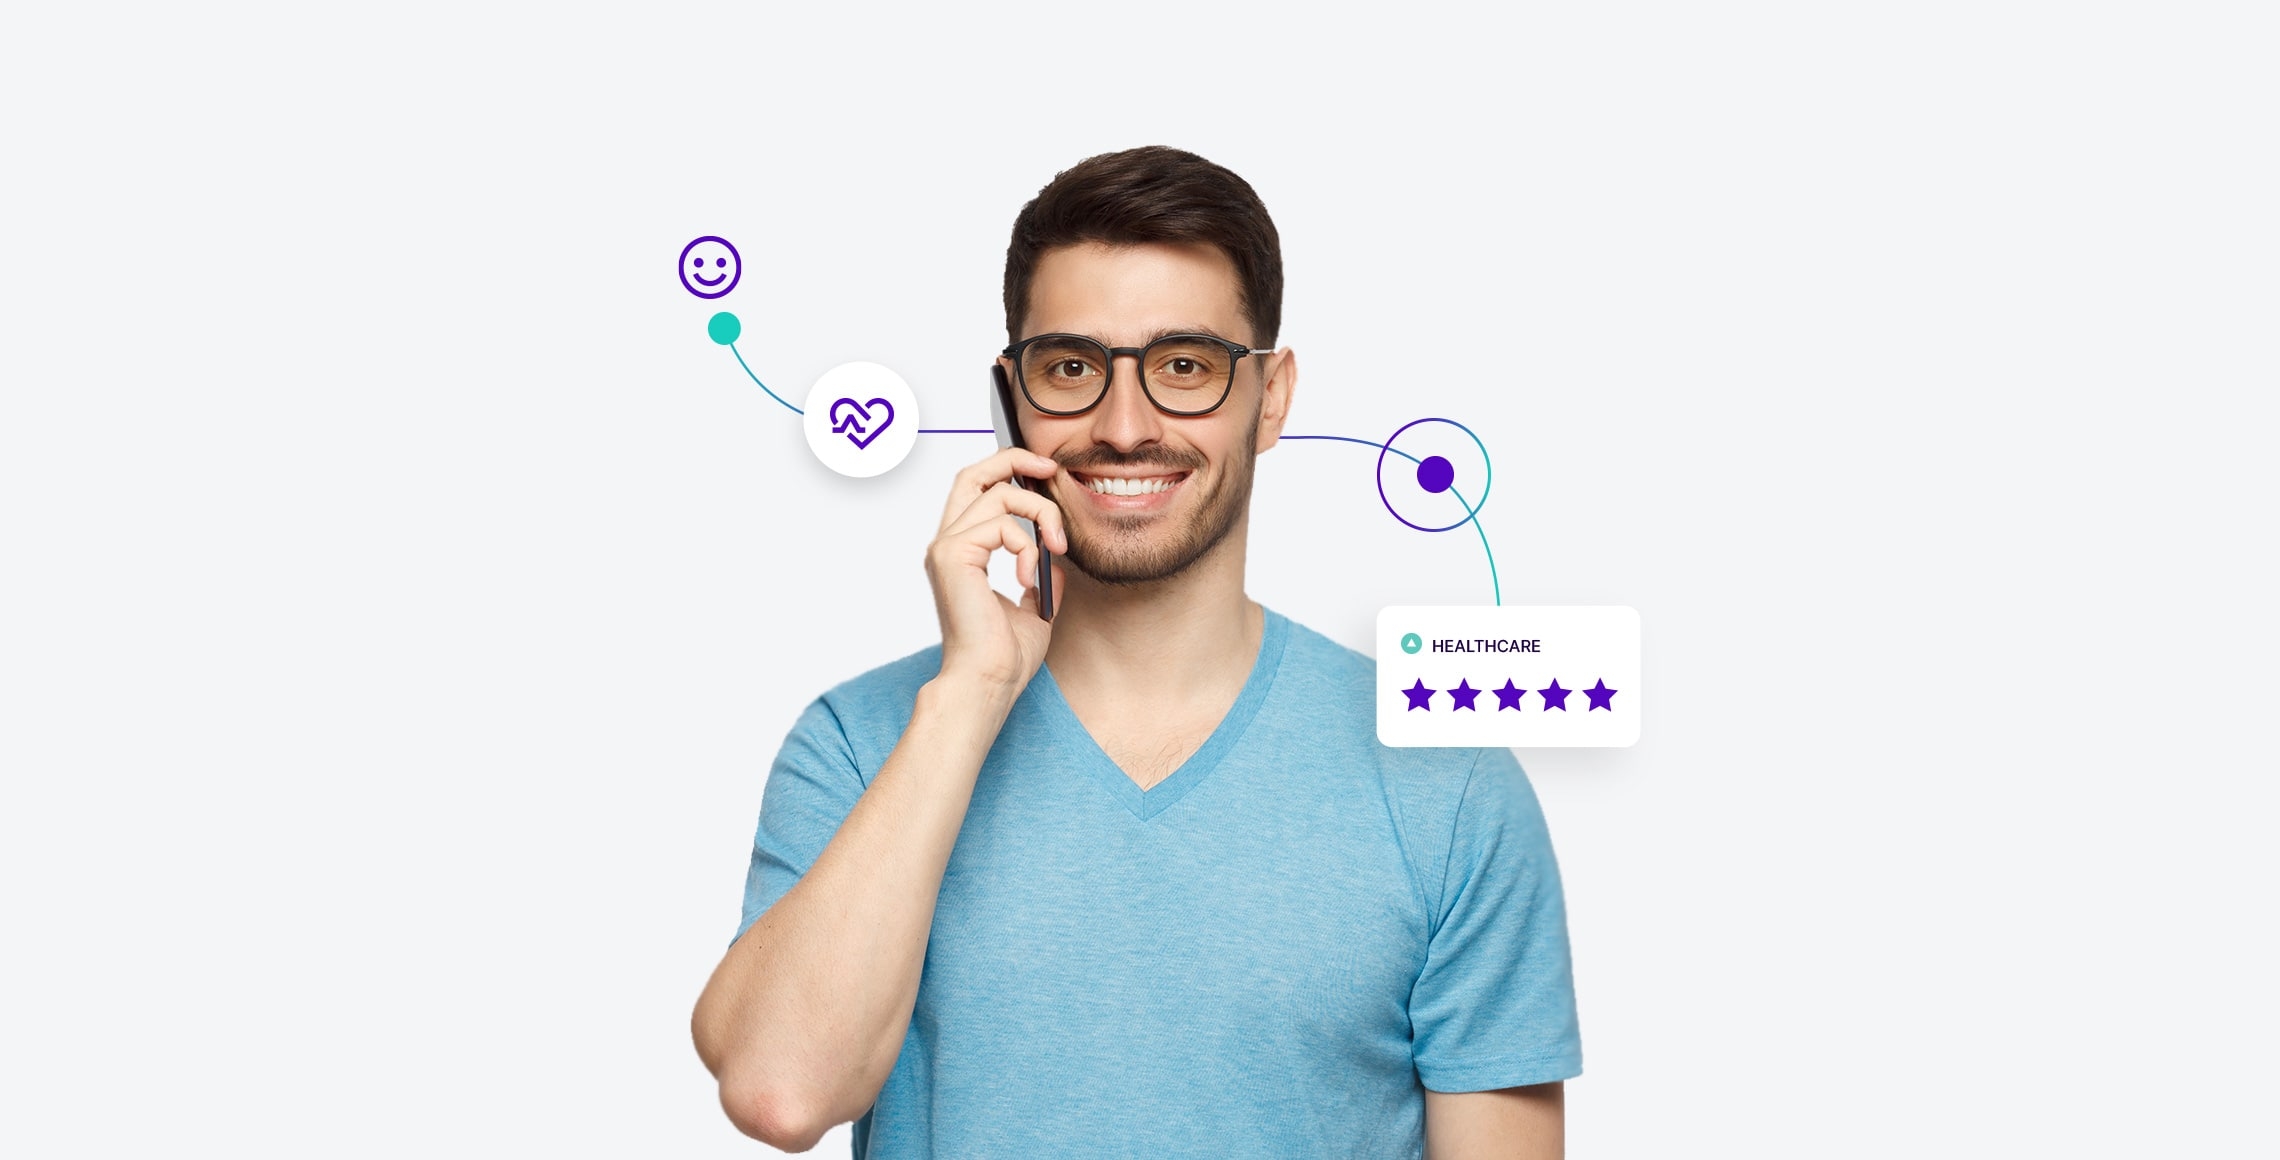 Smiling man with glasses talking on the phone healthcare service icons for HLTH conference